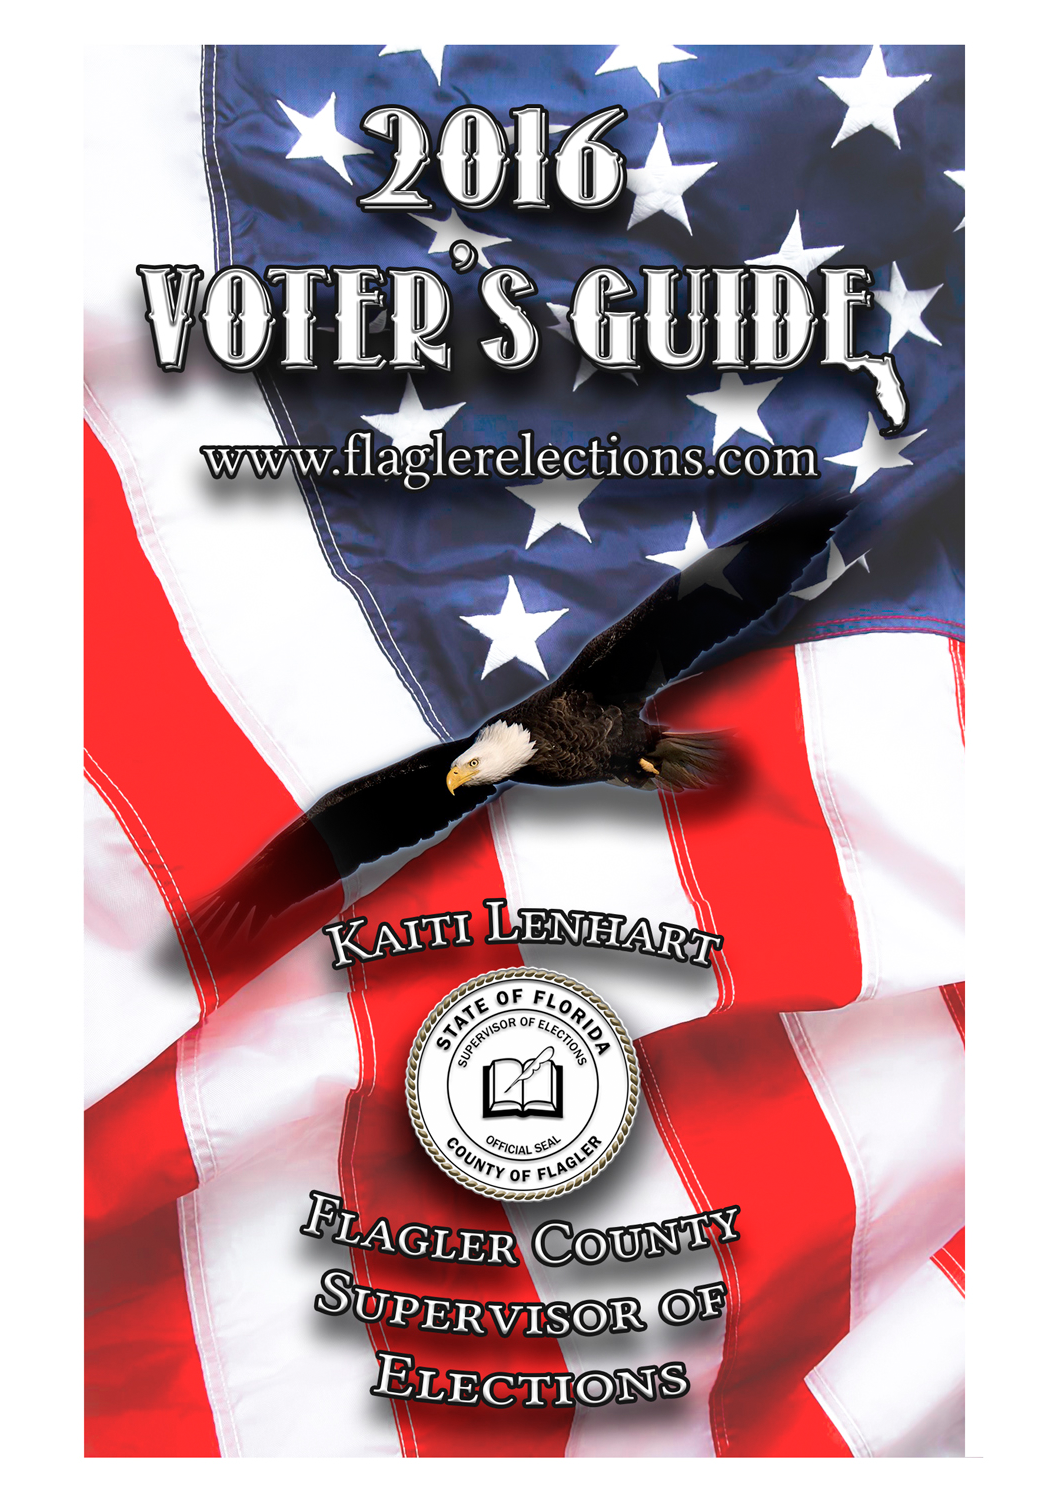 2016 Voter's Guide